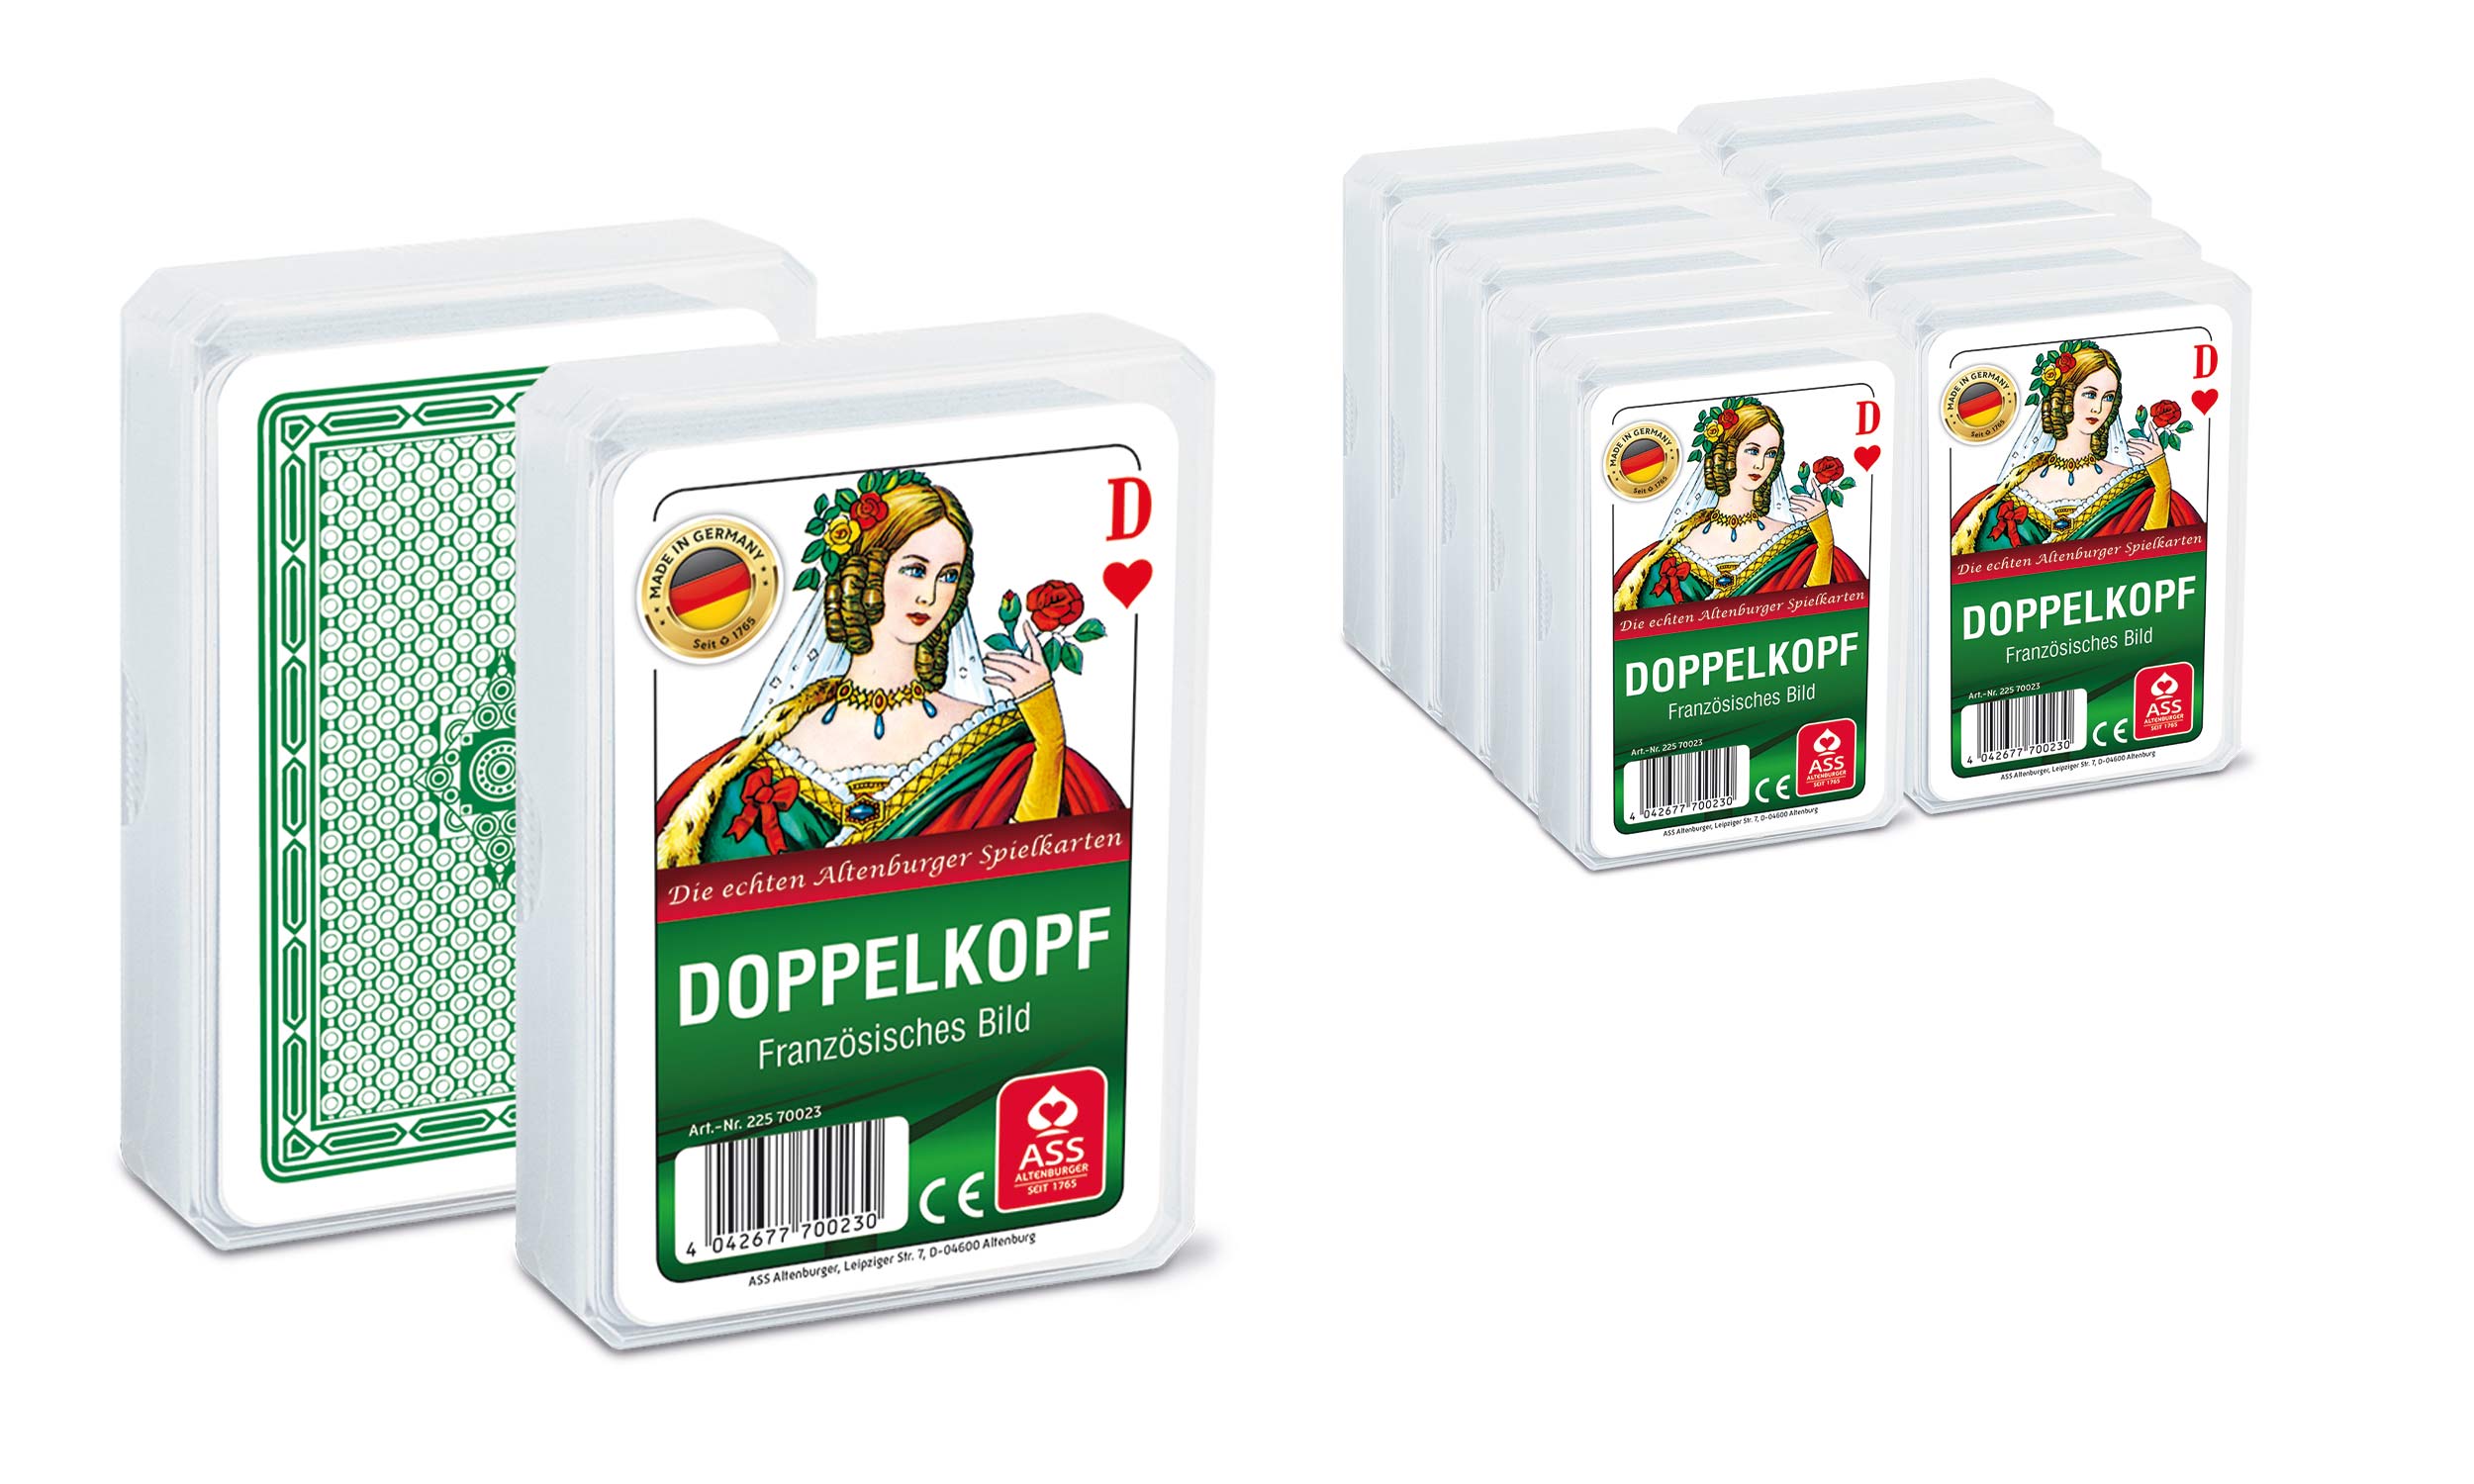 ASS, Doppelkopf, french image, in plastic case, pack of 10